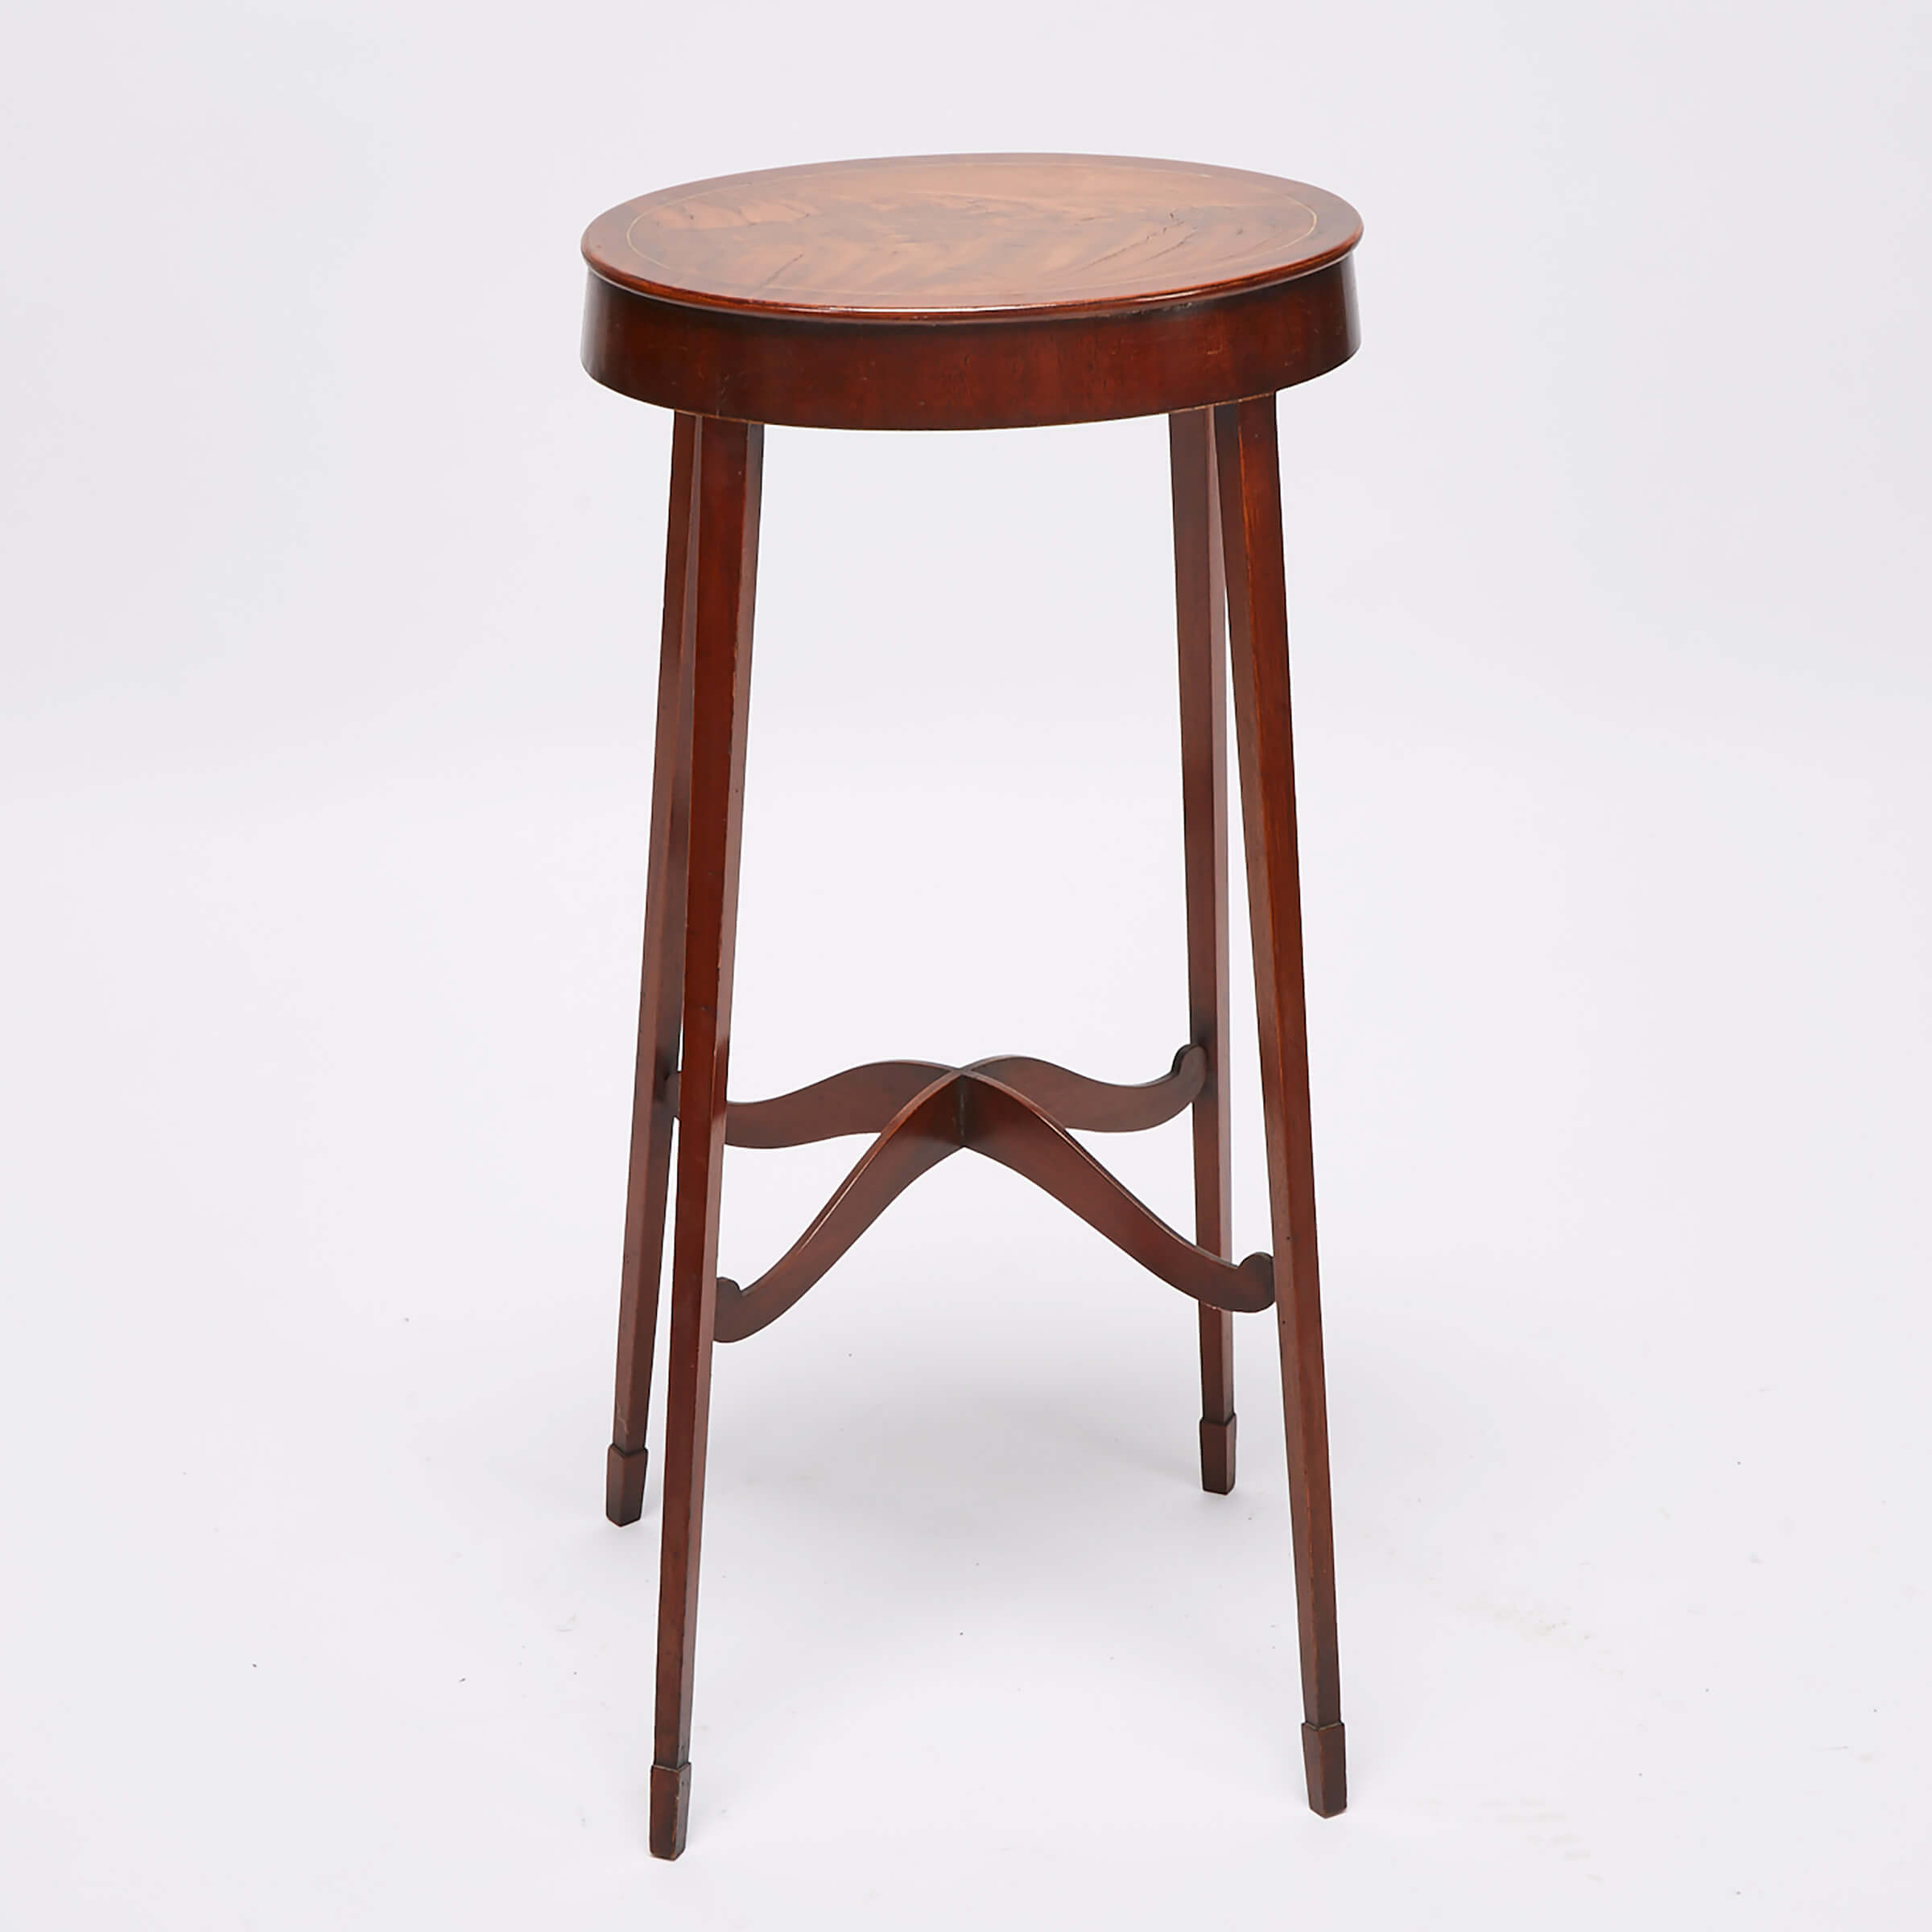 Regency Satinwood Strung Mahogany Oval Candle Stand, early 19th century